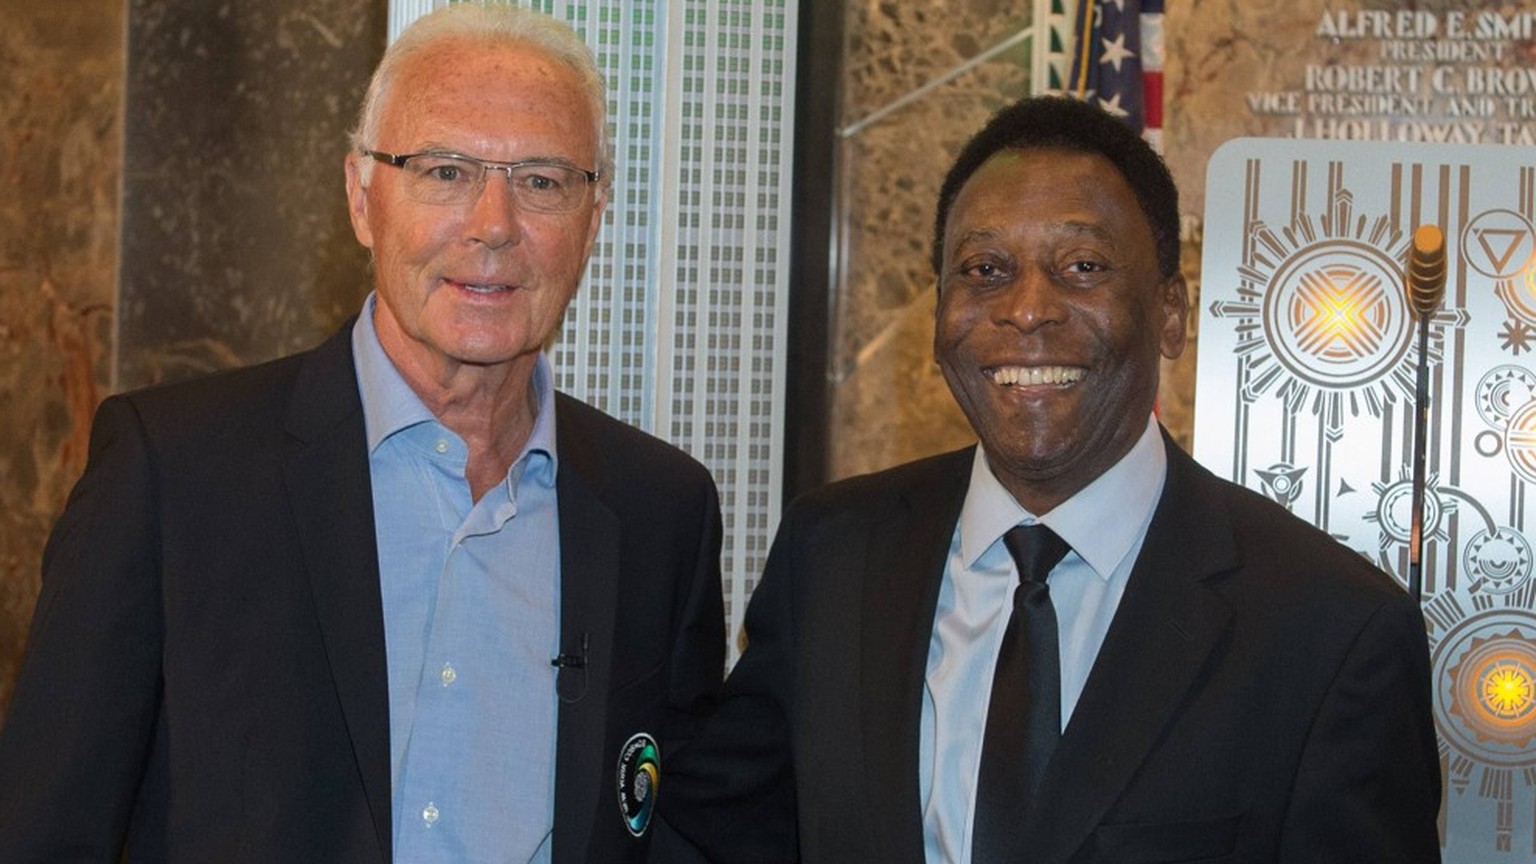 April 17, 2015 - Manhattan, New York, USA - The New York Cosmos Legends PELE and FRANZ BECKENBAUER light the Empire State Building Cosmos Green to launch and celebrate the start of the team s 2015 ope ...